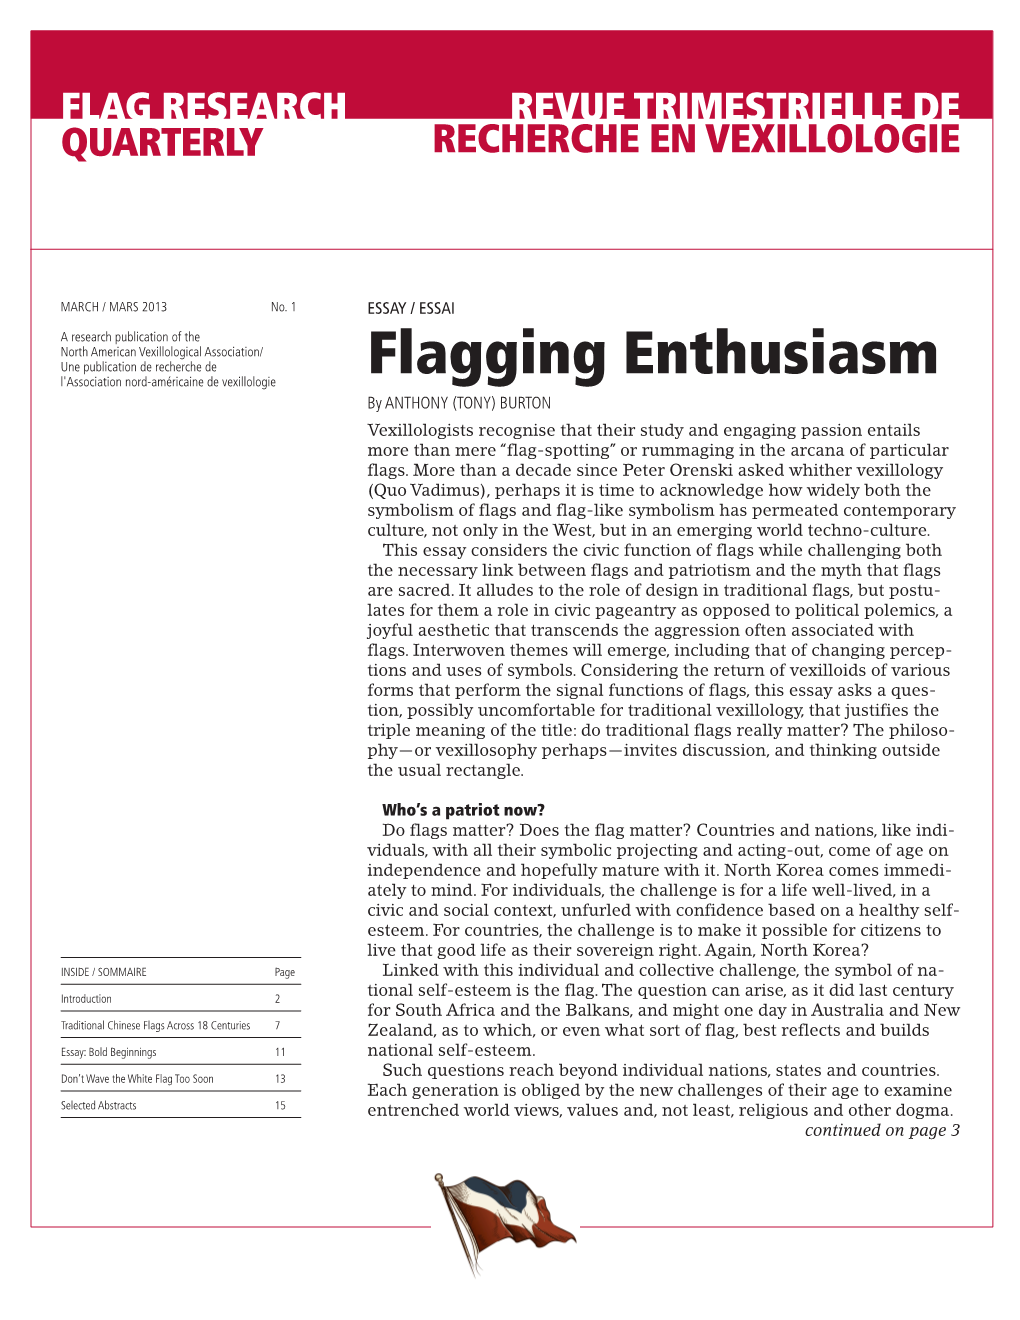 Flag Research Quarterly, March 2013, No. 1